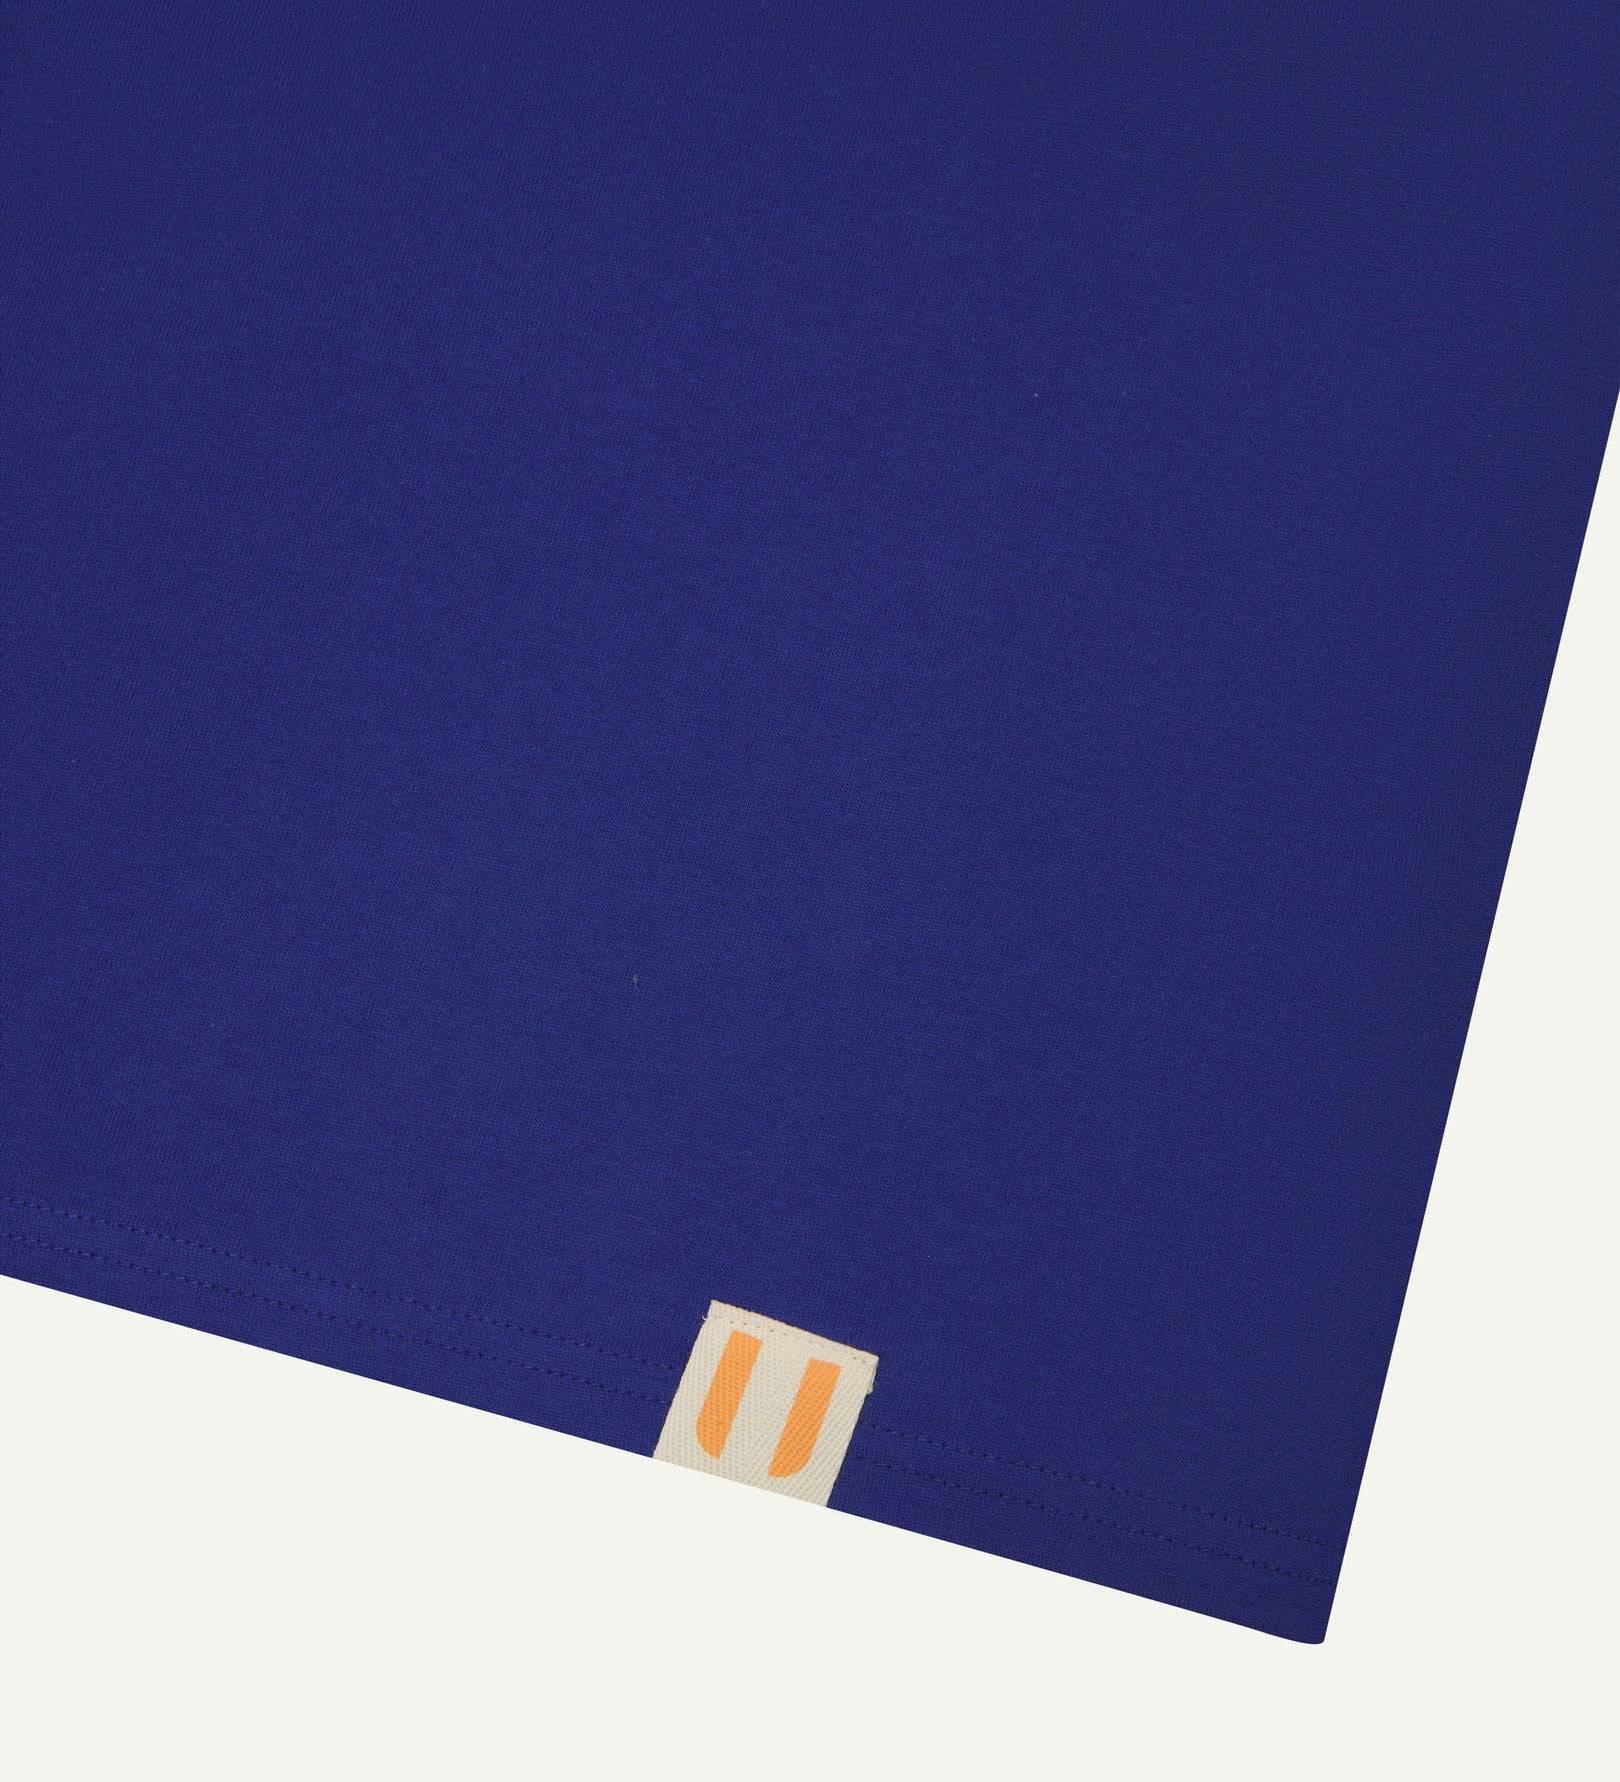 Hem close-up of Uskees ultra blue organic cotton T-shirt showing square branding label.